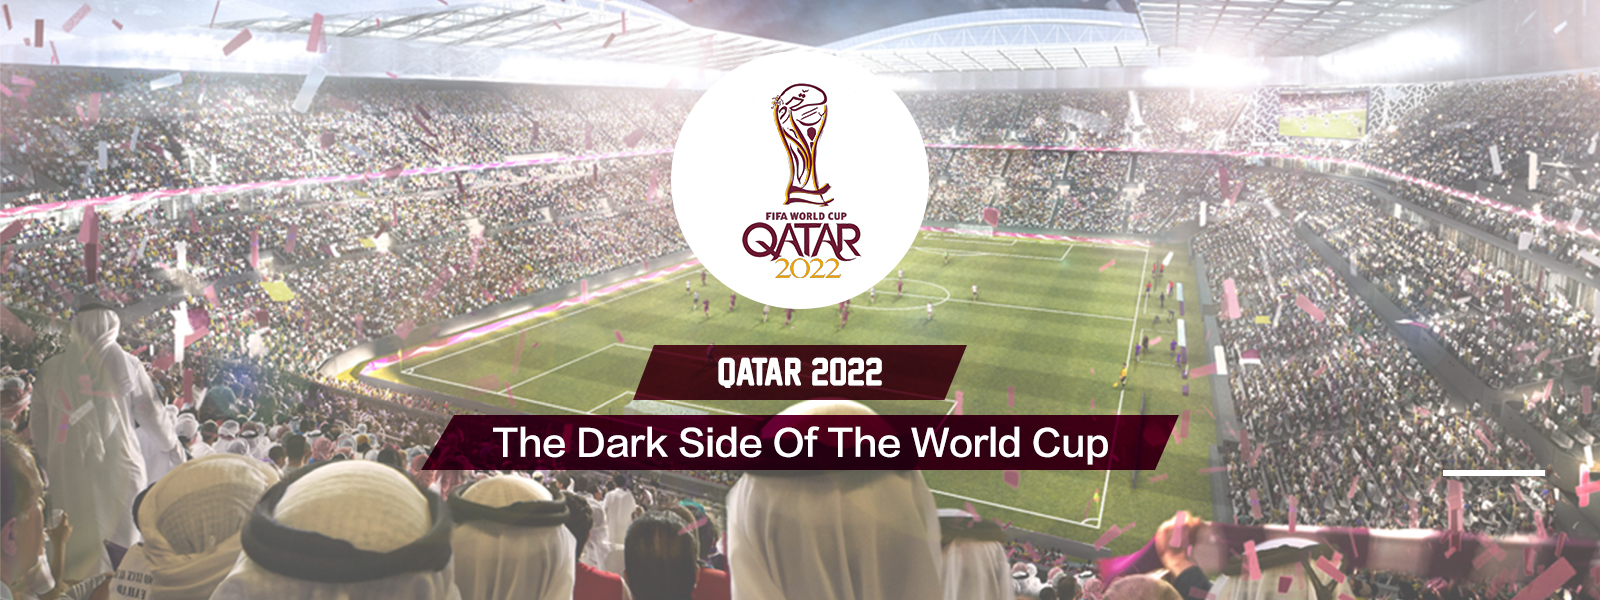 The Dark Side Of The Qatar 2022 World Cup